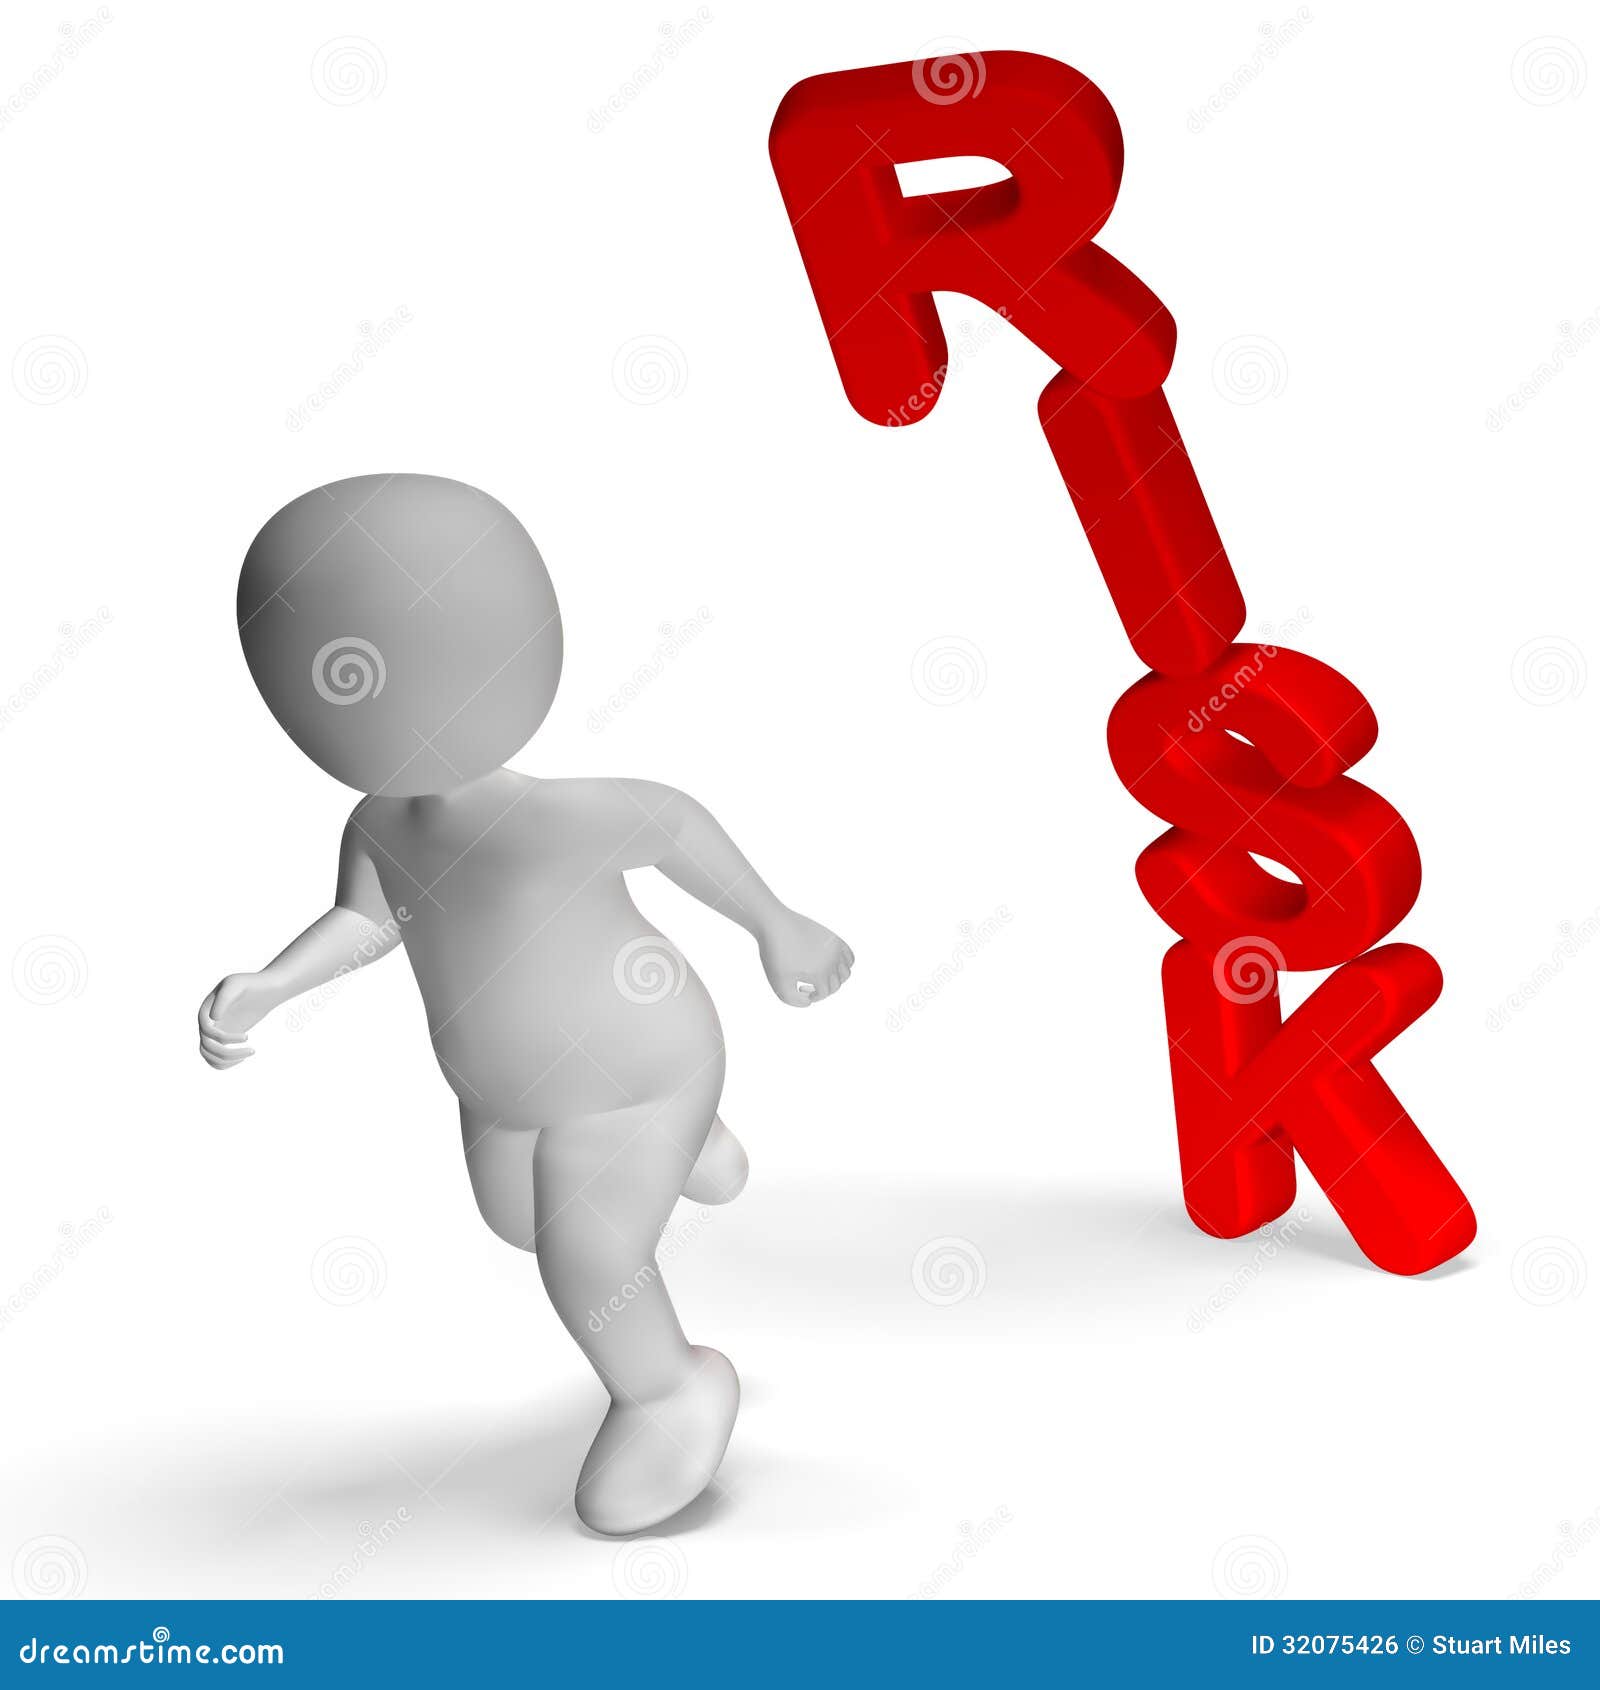 risk and 3d character shows peril and uncertainty